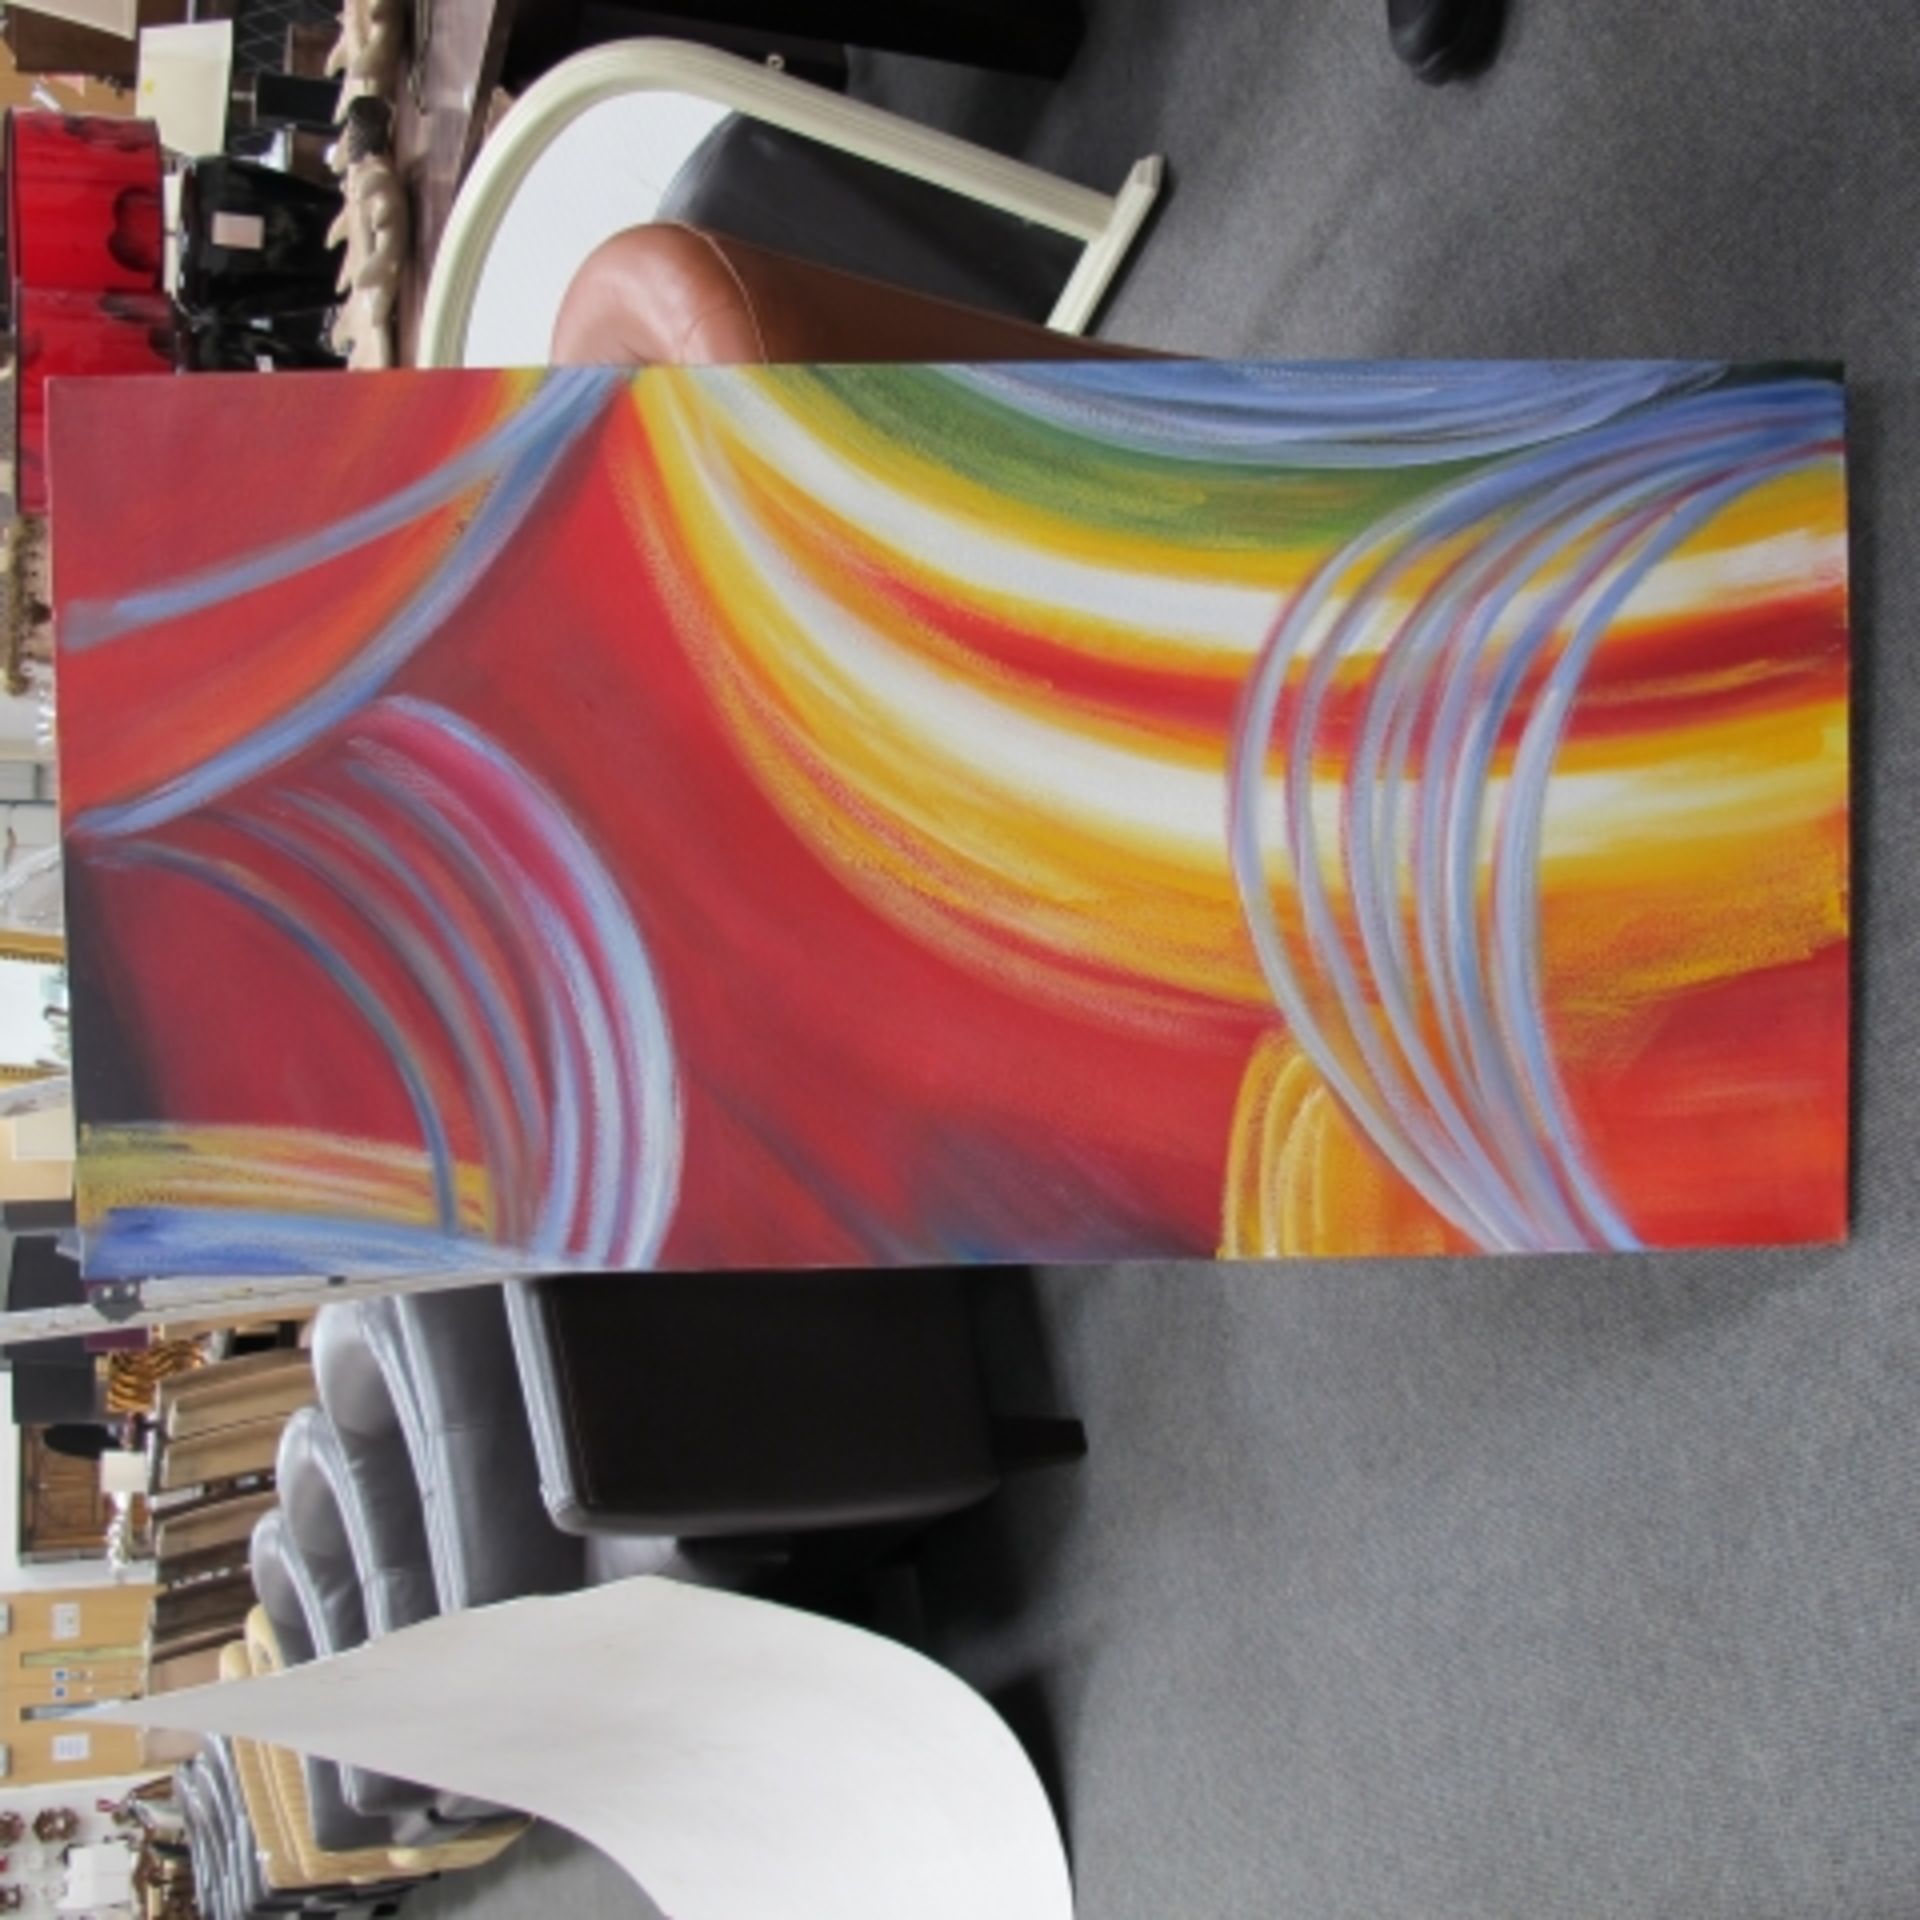 Collection of five unframed abstract oil paintings by Rachel Jack Ltd Artists (est. £20-£40) - Image 3 of 6